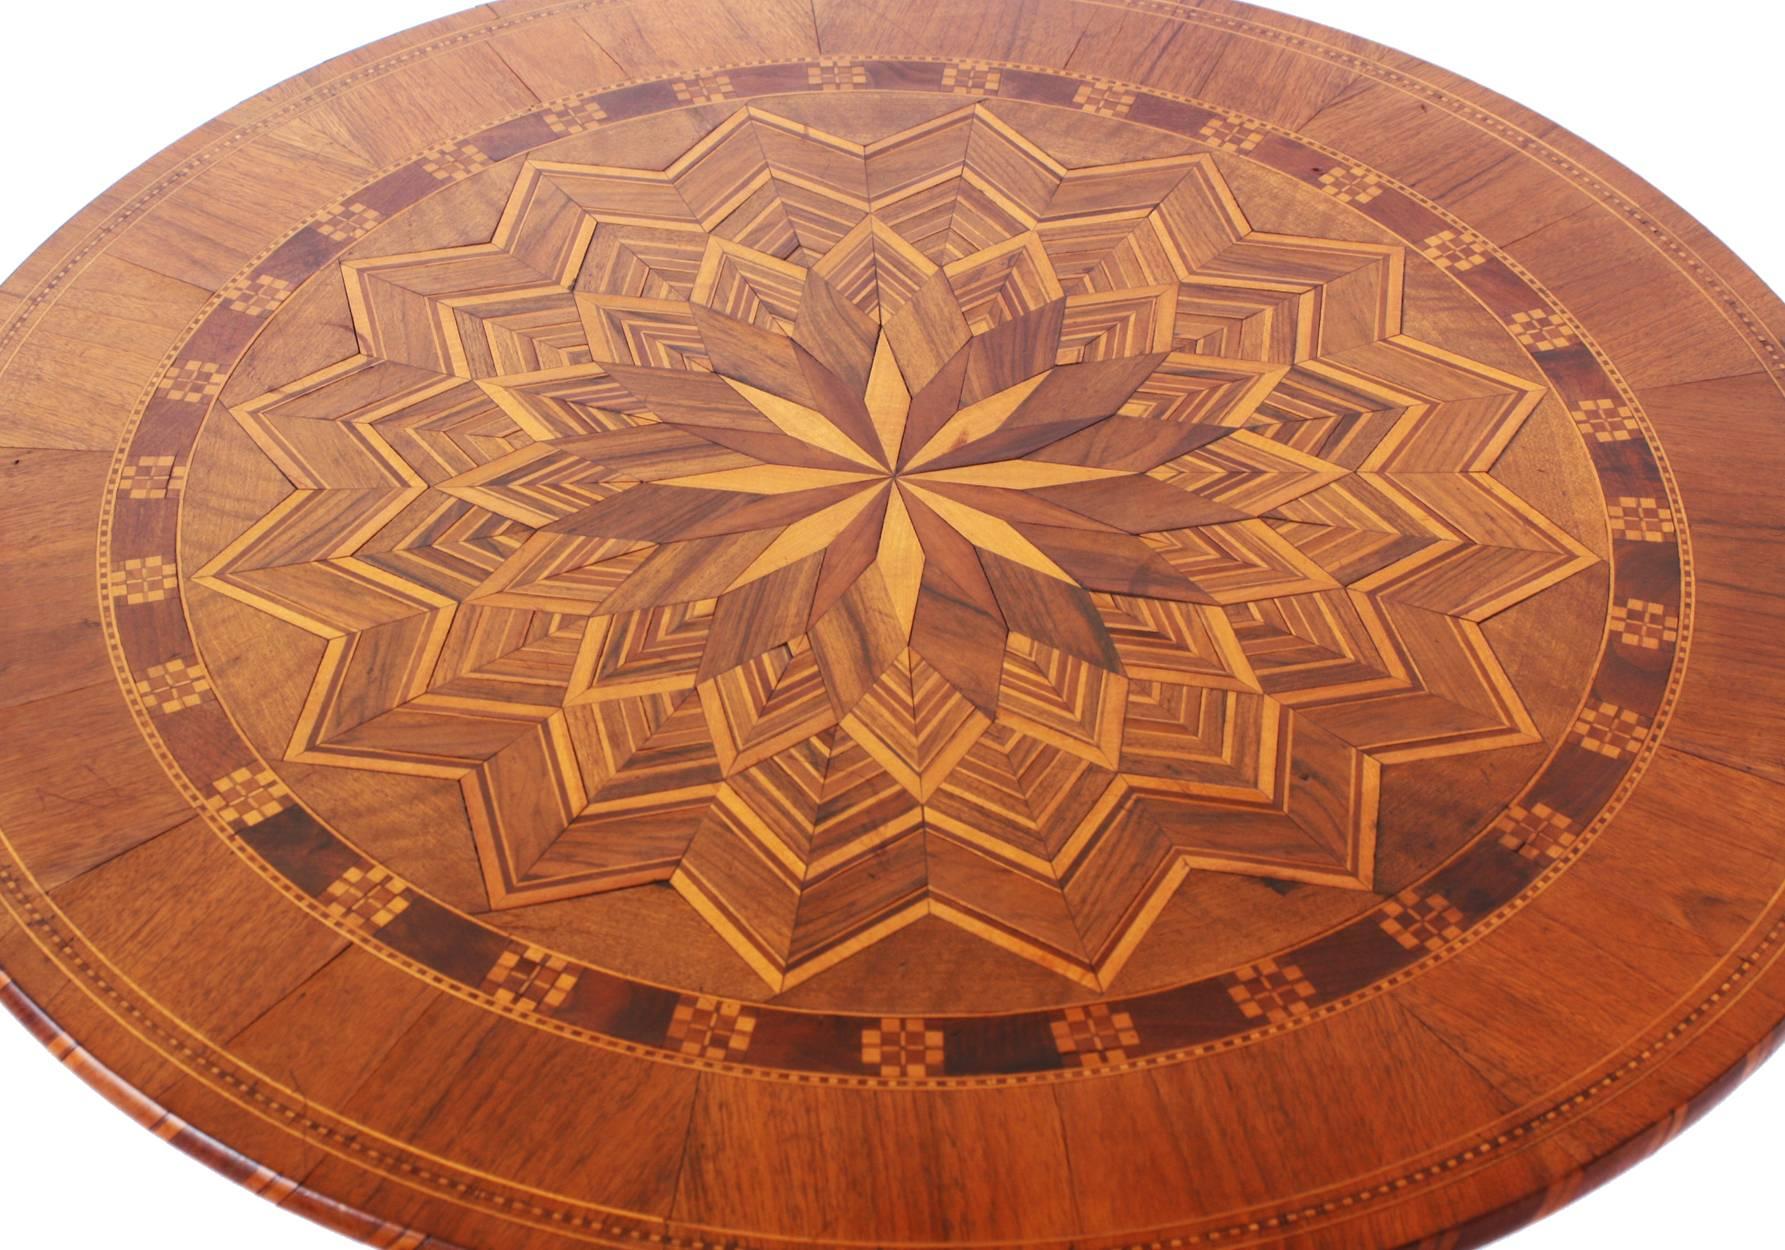 19th century Italian occasional table with an elaborate multispecies inlaid starburst pattern top which sets on a pedestal base with tripod feet.

Made in Italy label affixed. (See image 3).